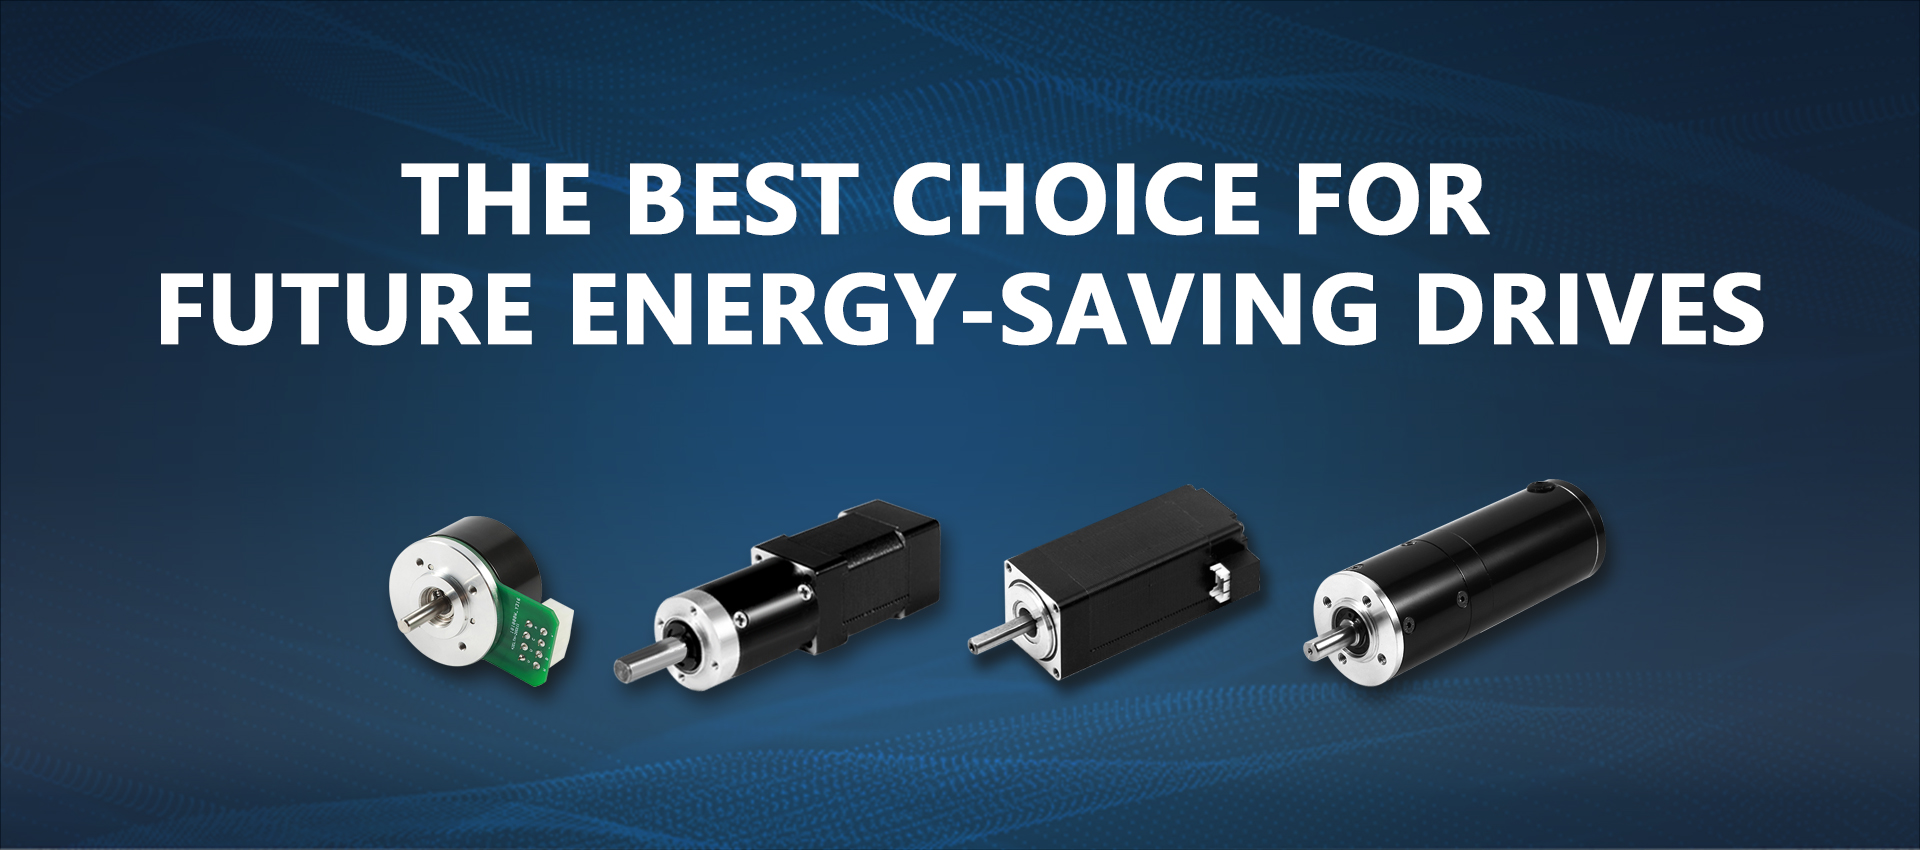 BLDC-the best choice for future energy-saving drives